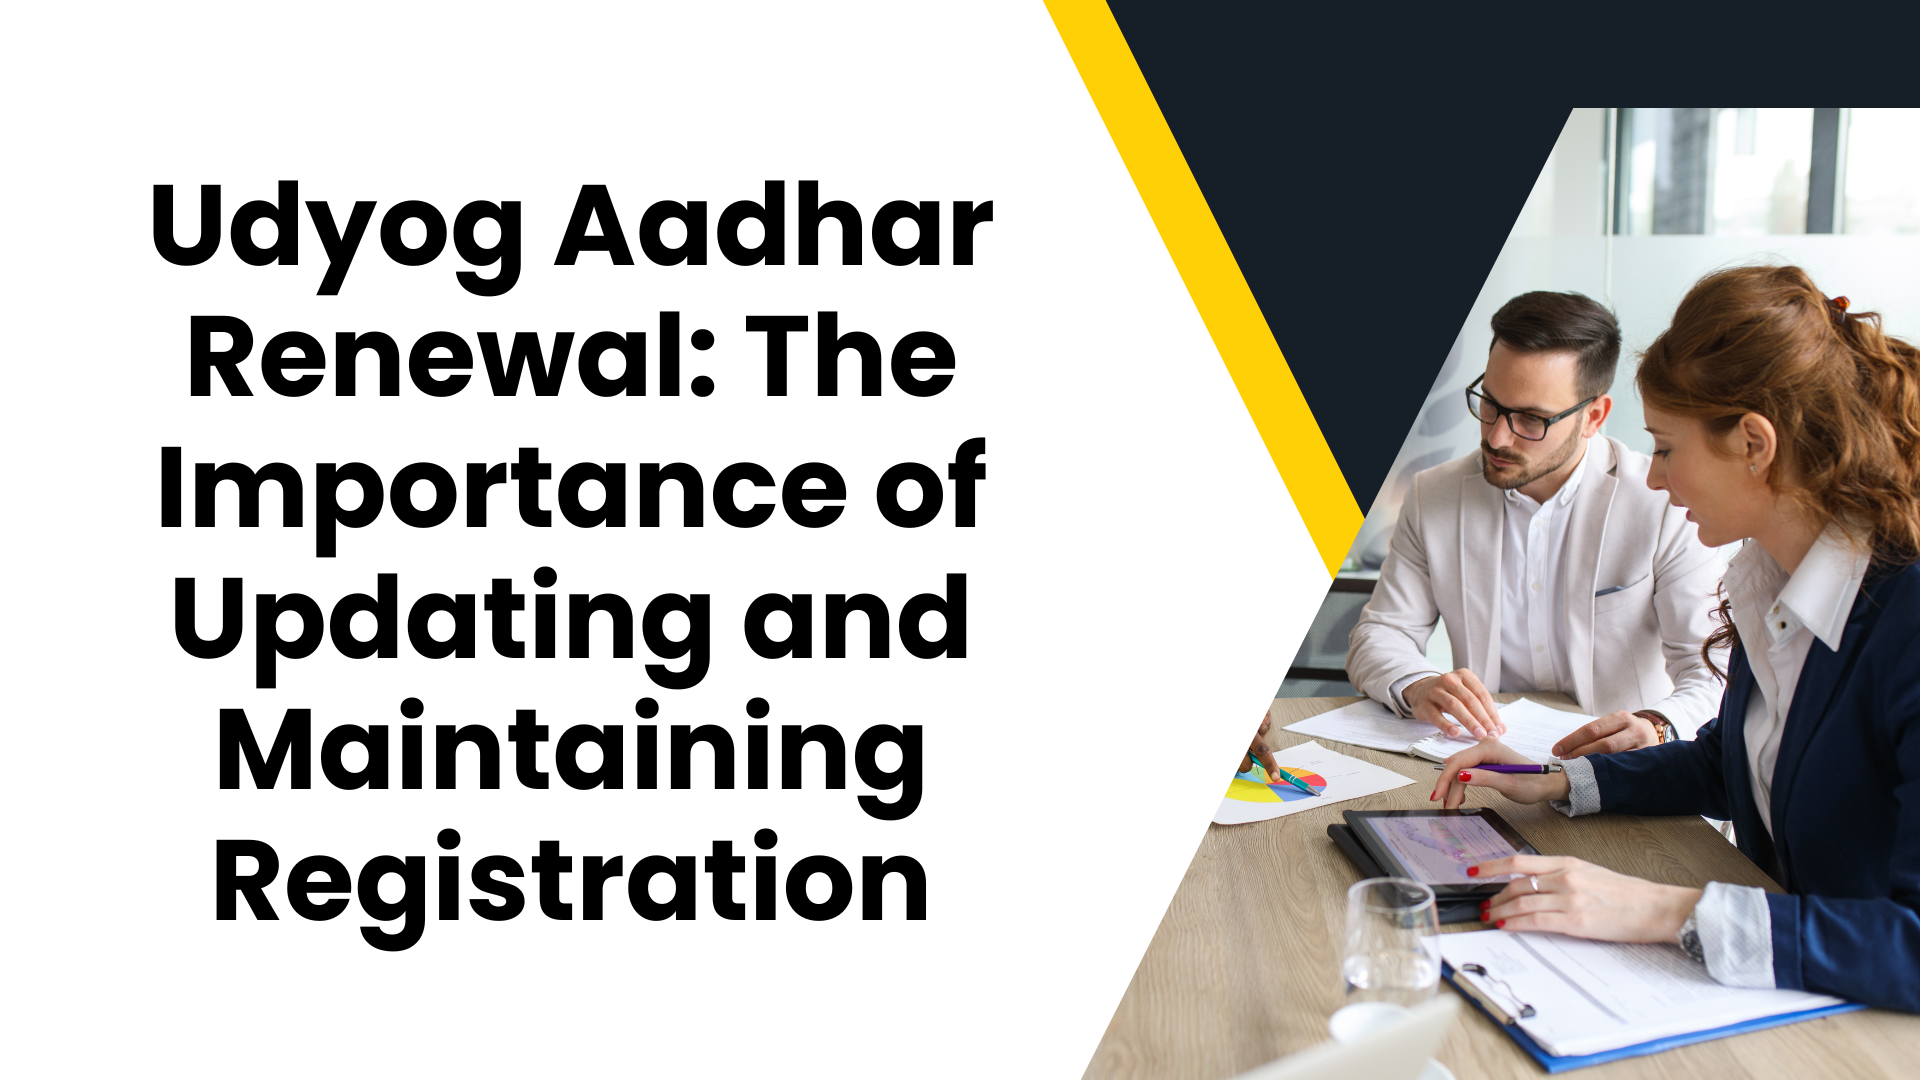 Udyog Aadhar Renewal The Importance of Updating and Maintaining Registration